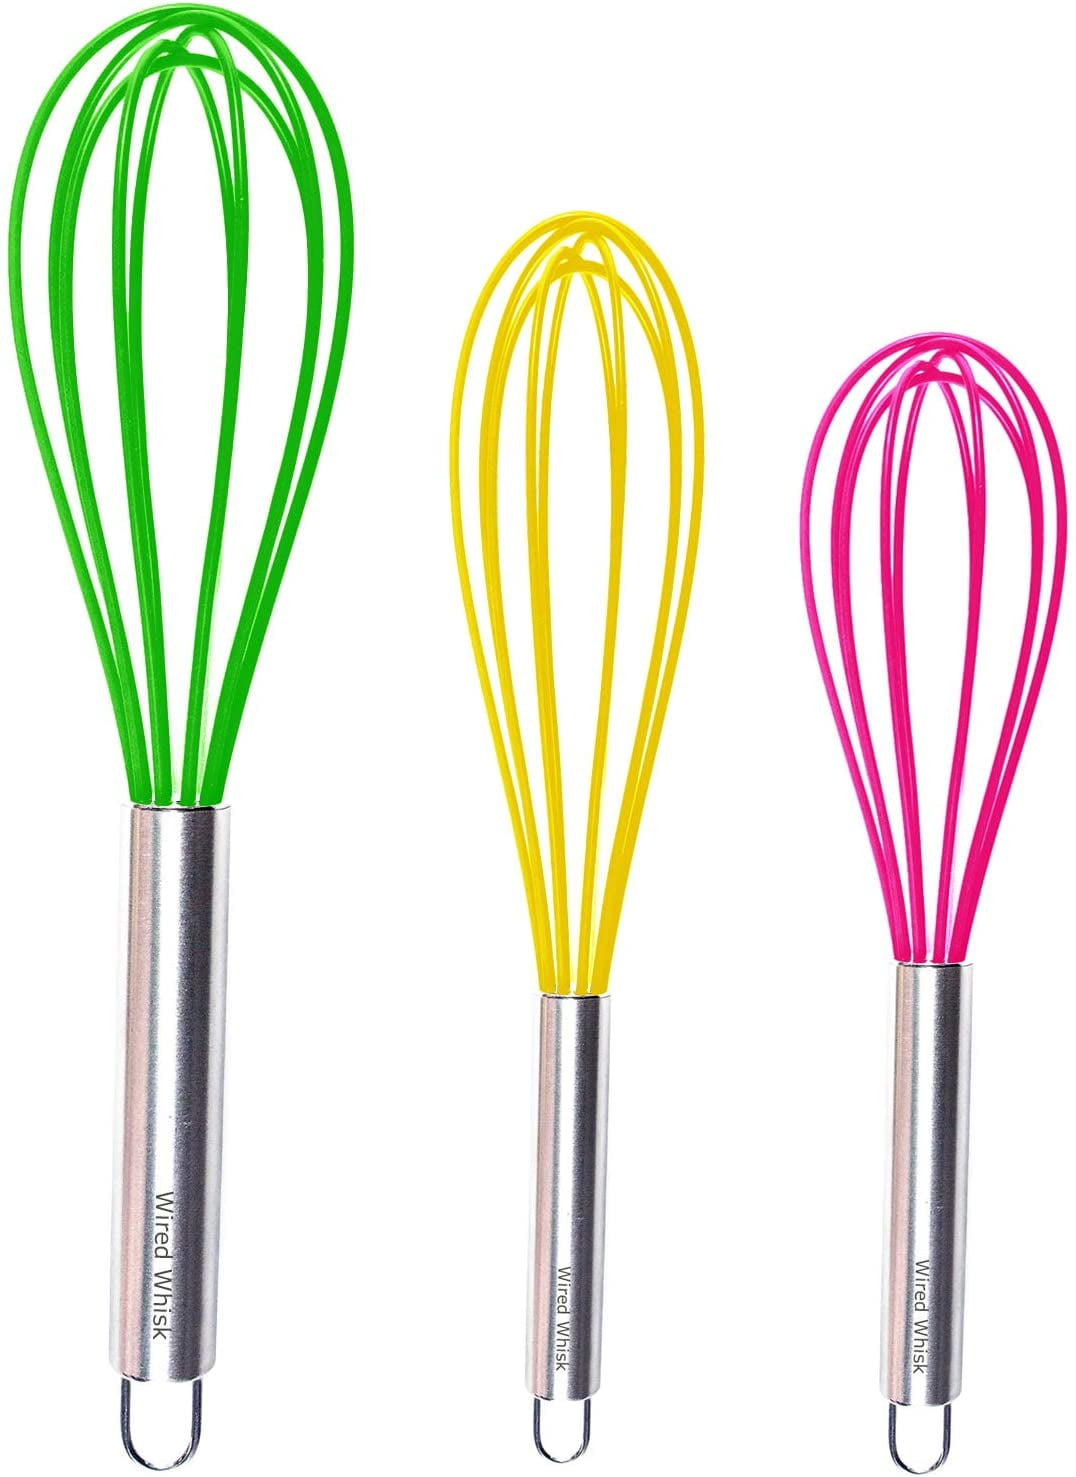 8.5 Silicone Whisk - Whisk